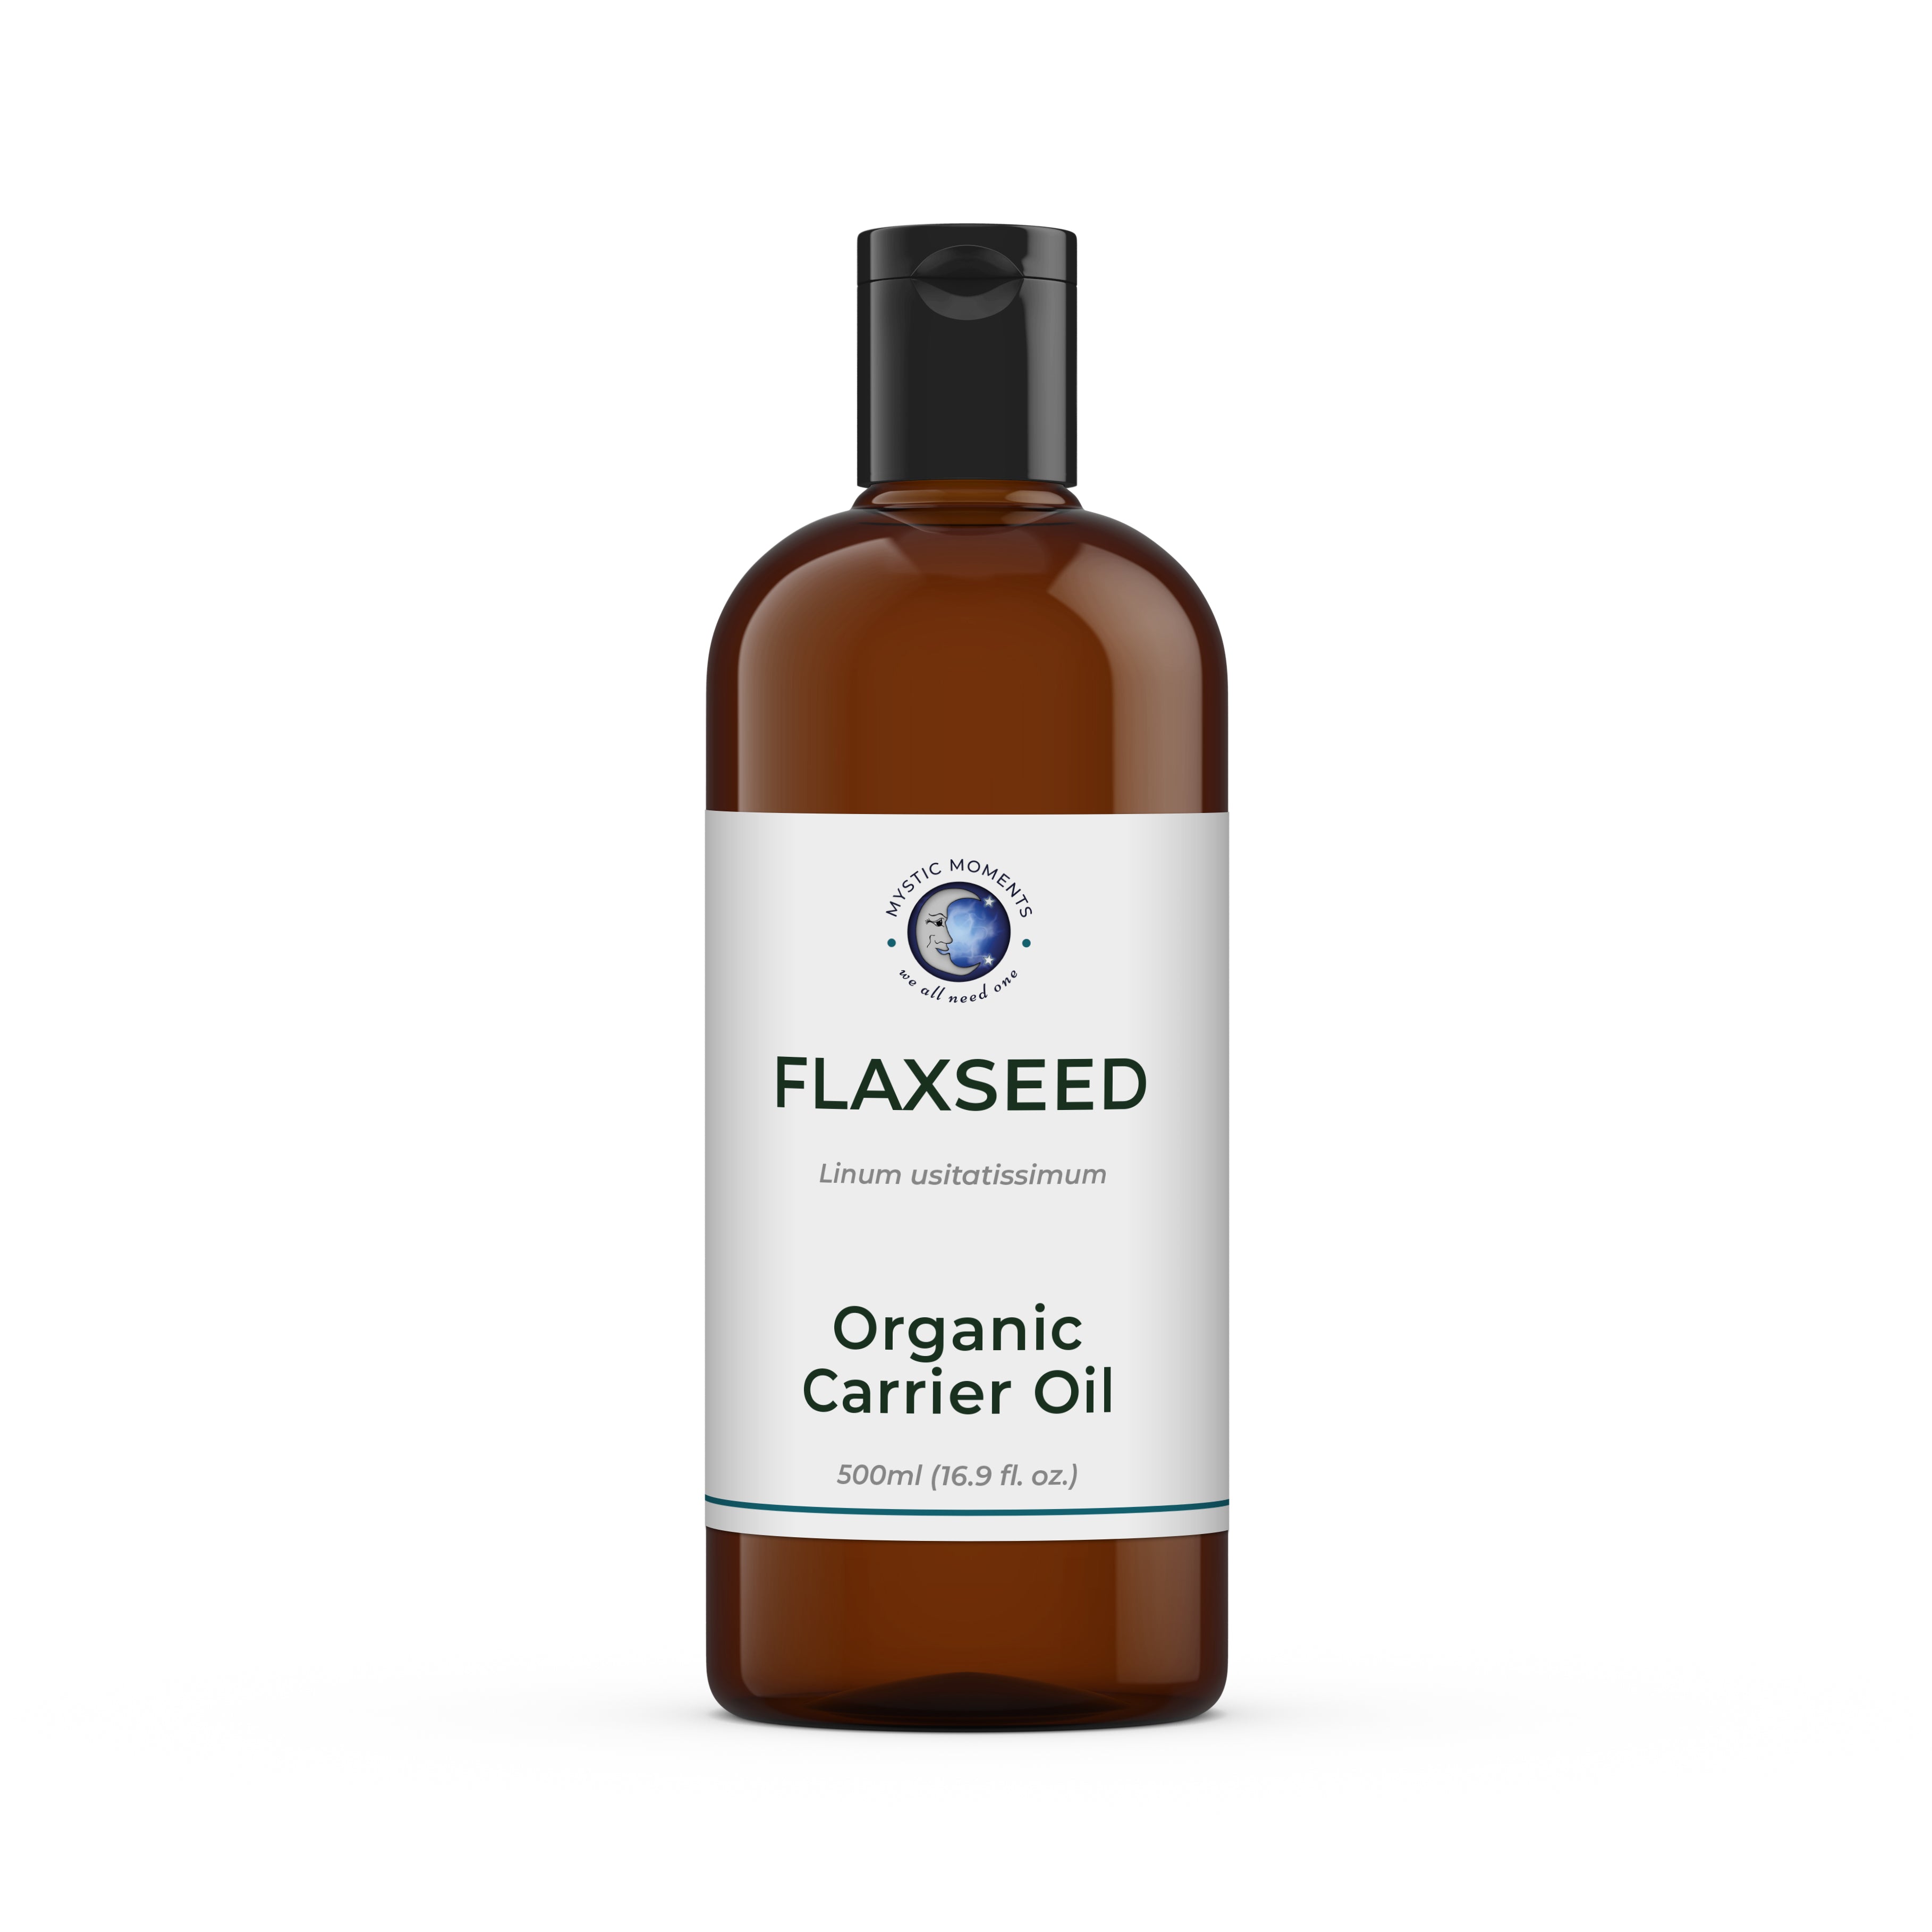 Flaxseed Organic Carrier Oil